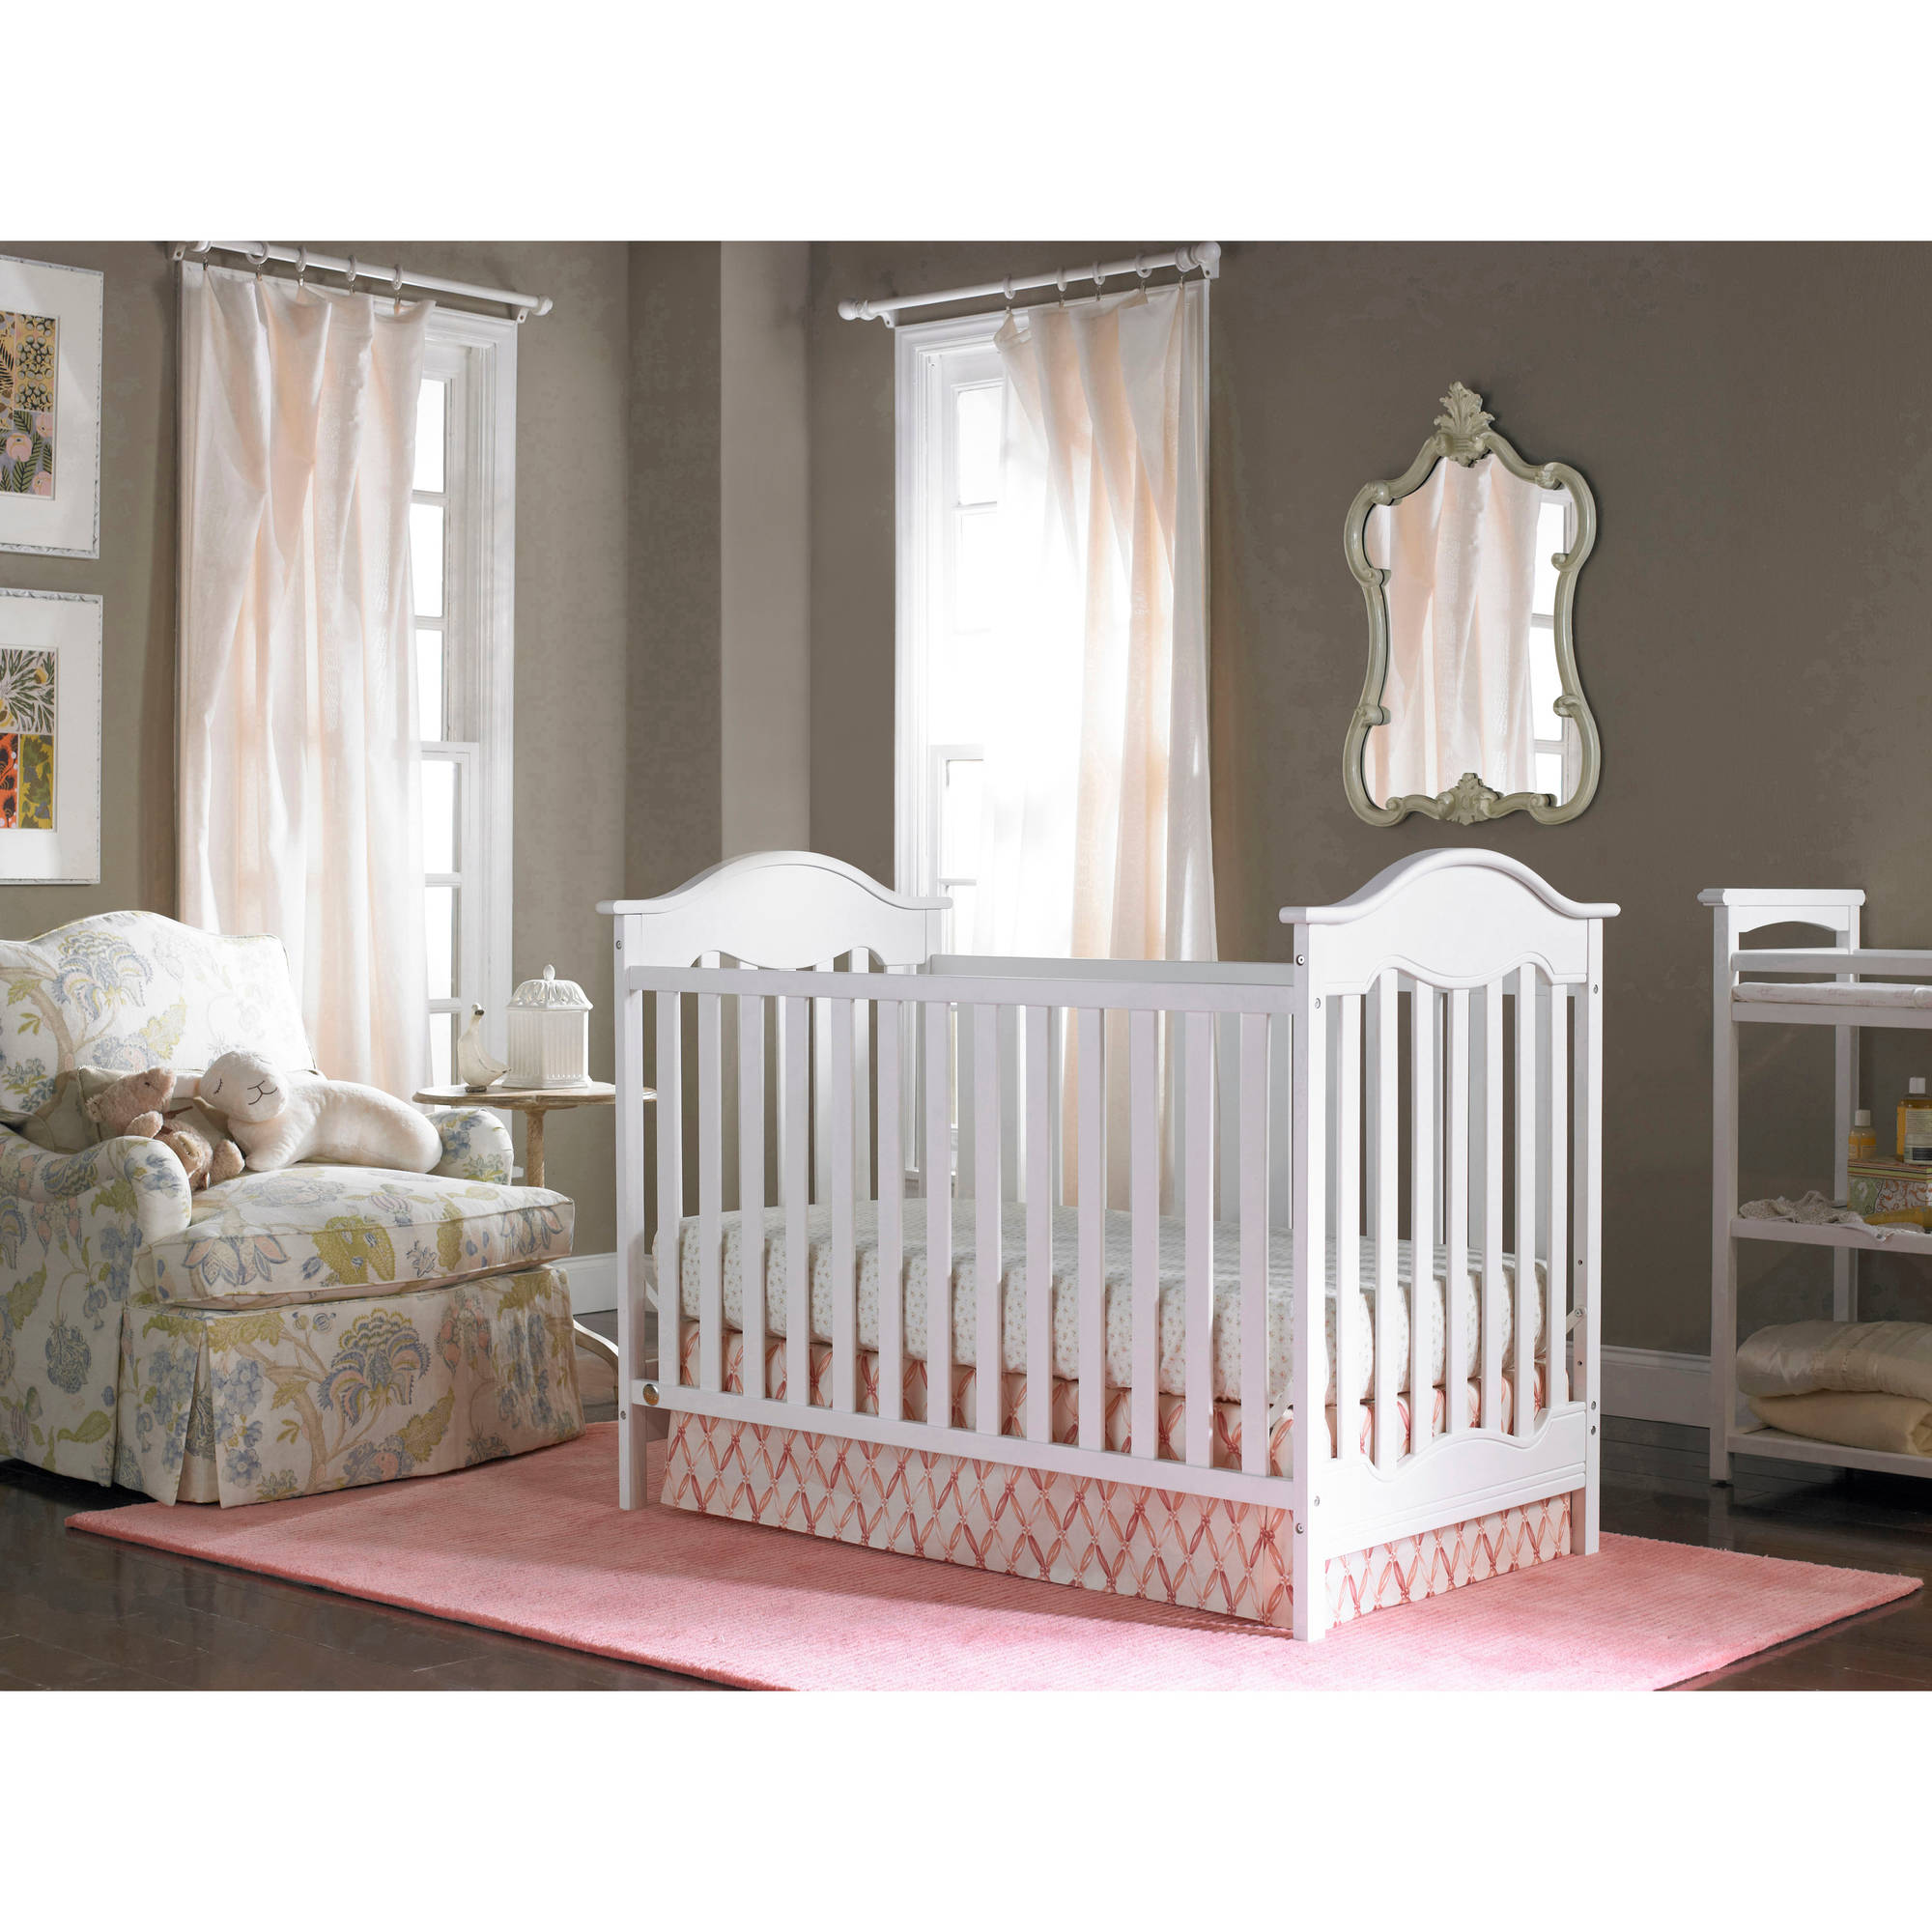 Fisher-Price Charlotte 3-in-1 Convertible Crib, Snow White - image 5 of 8